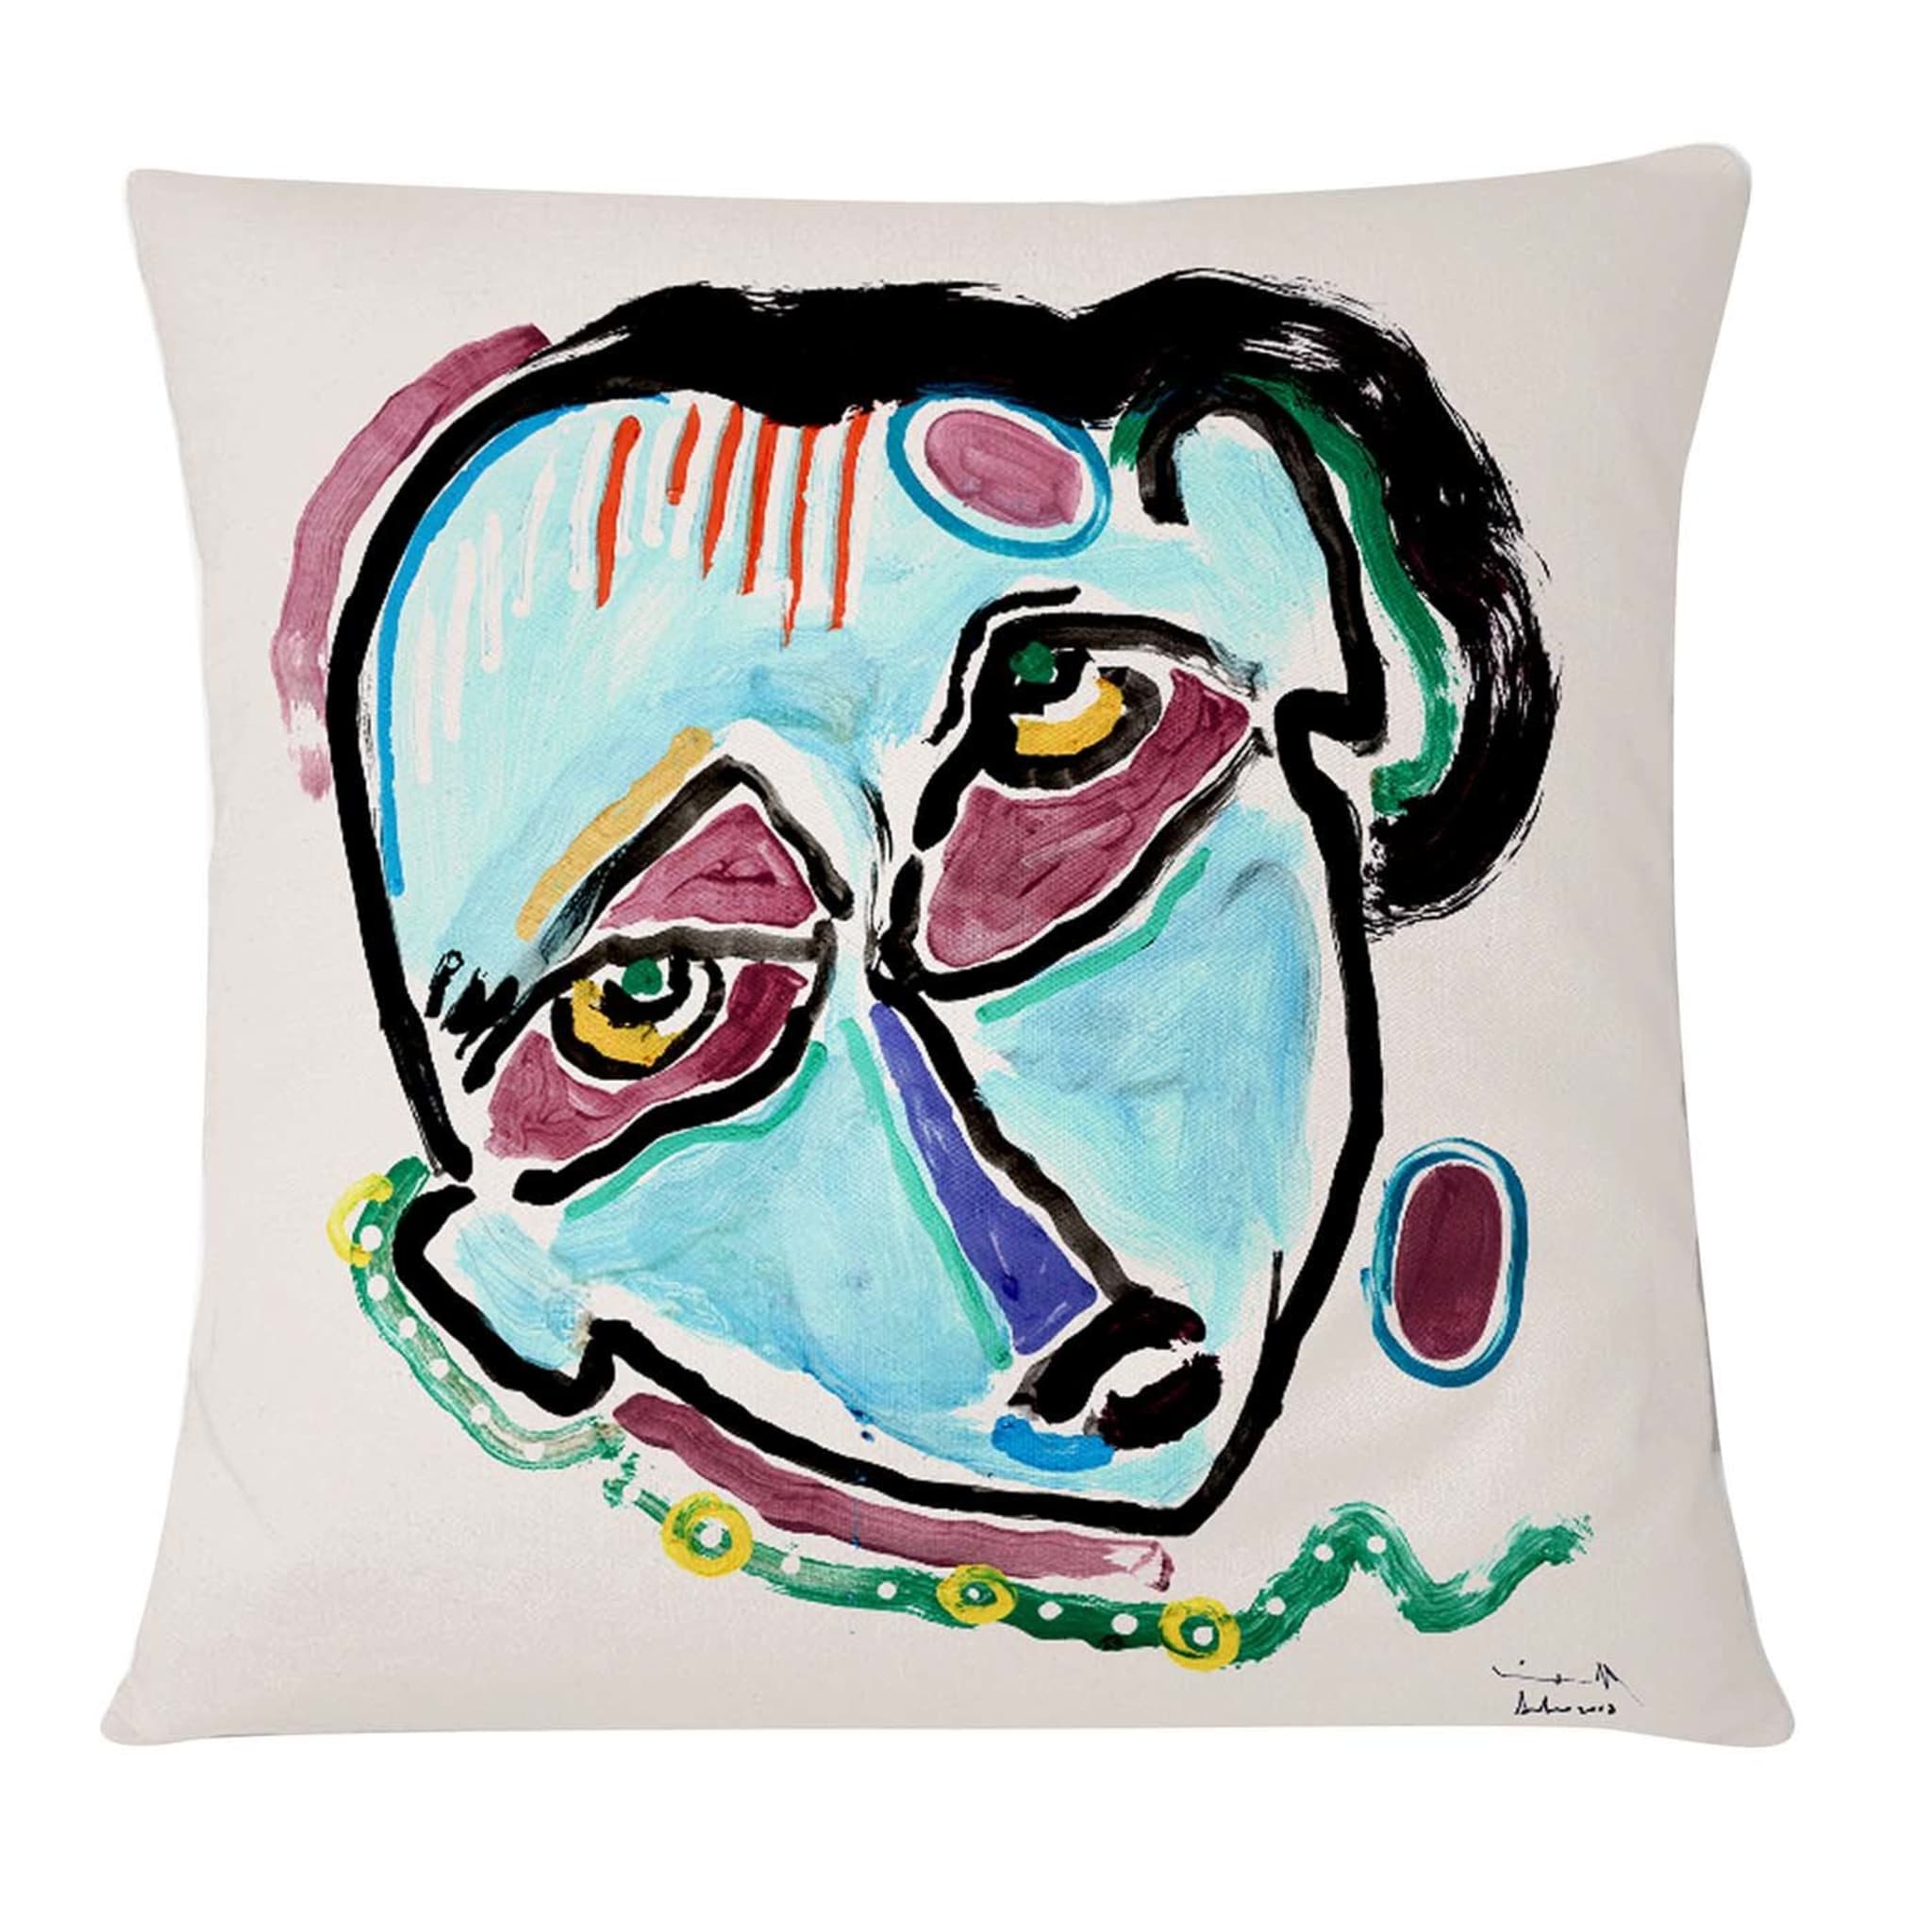 Amarcord VII Cushion by Vincenzo D'Alba and Antonio Marras - Main view